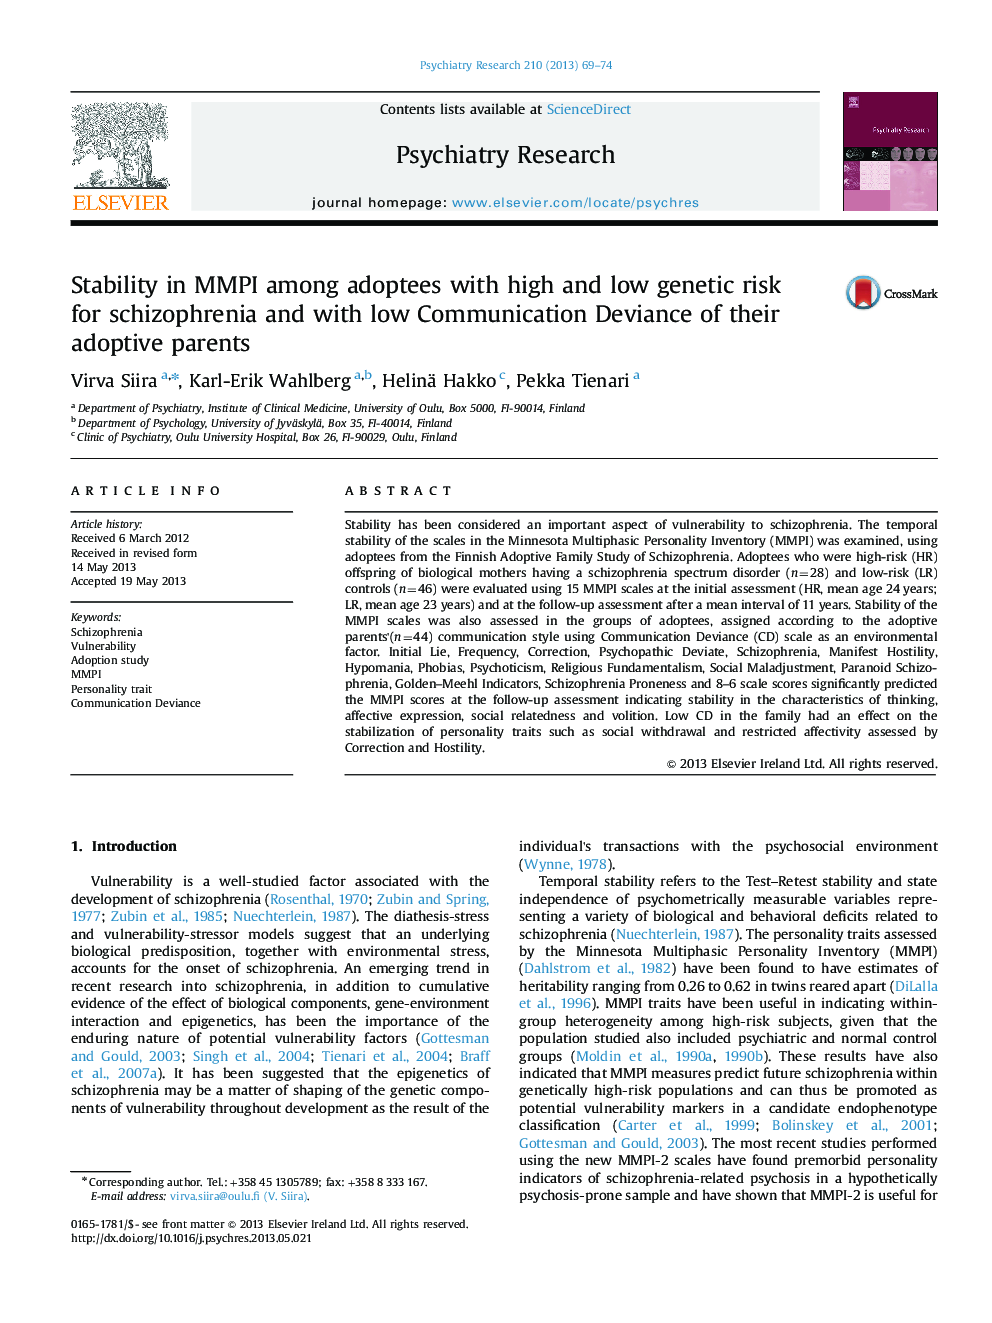 Stability in MMPI among adoptees with high and low genetic risk for schizophrenia and with low Communication Deviance of their adoptive parents